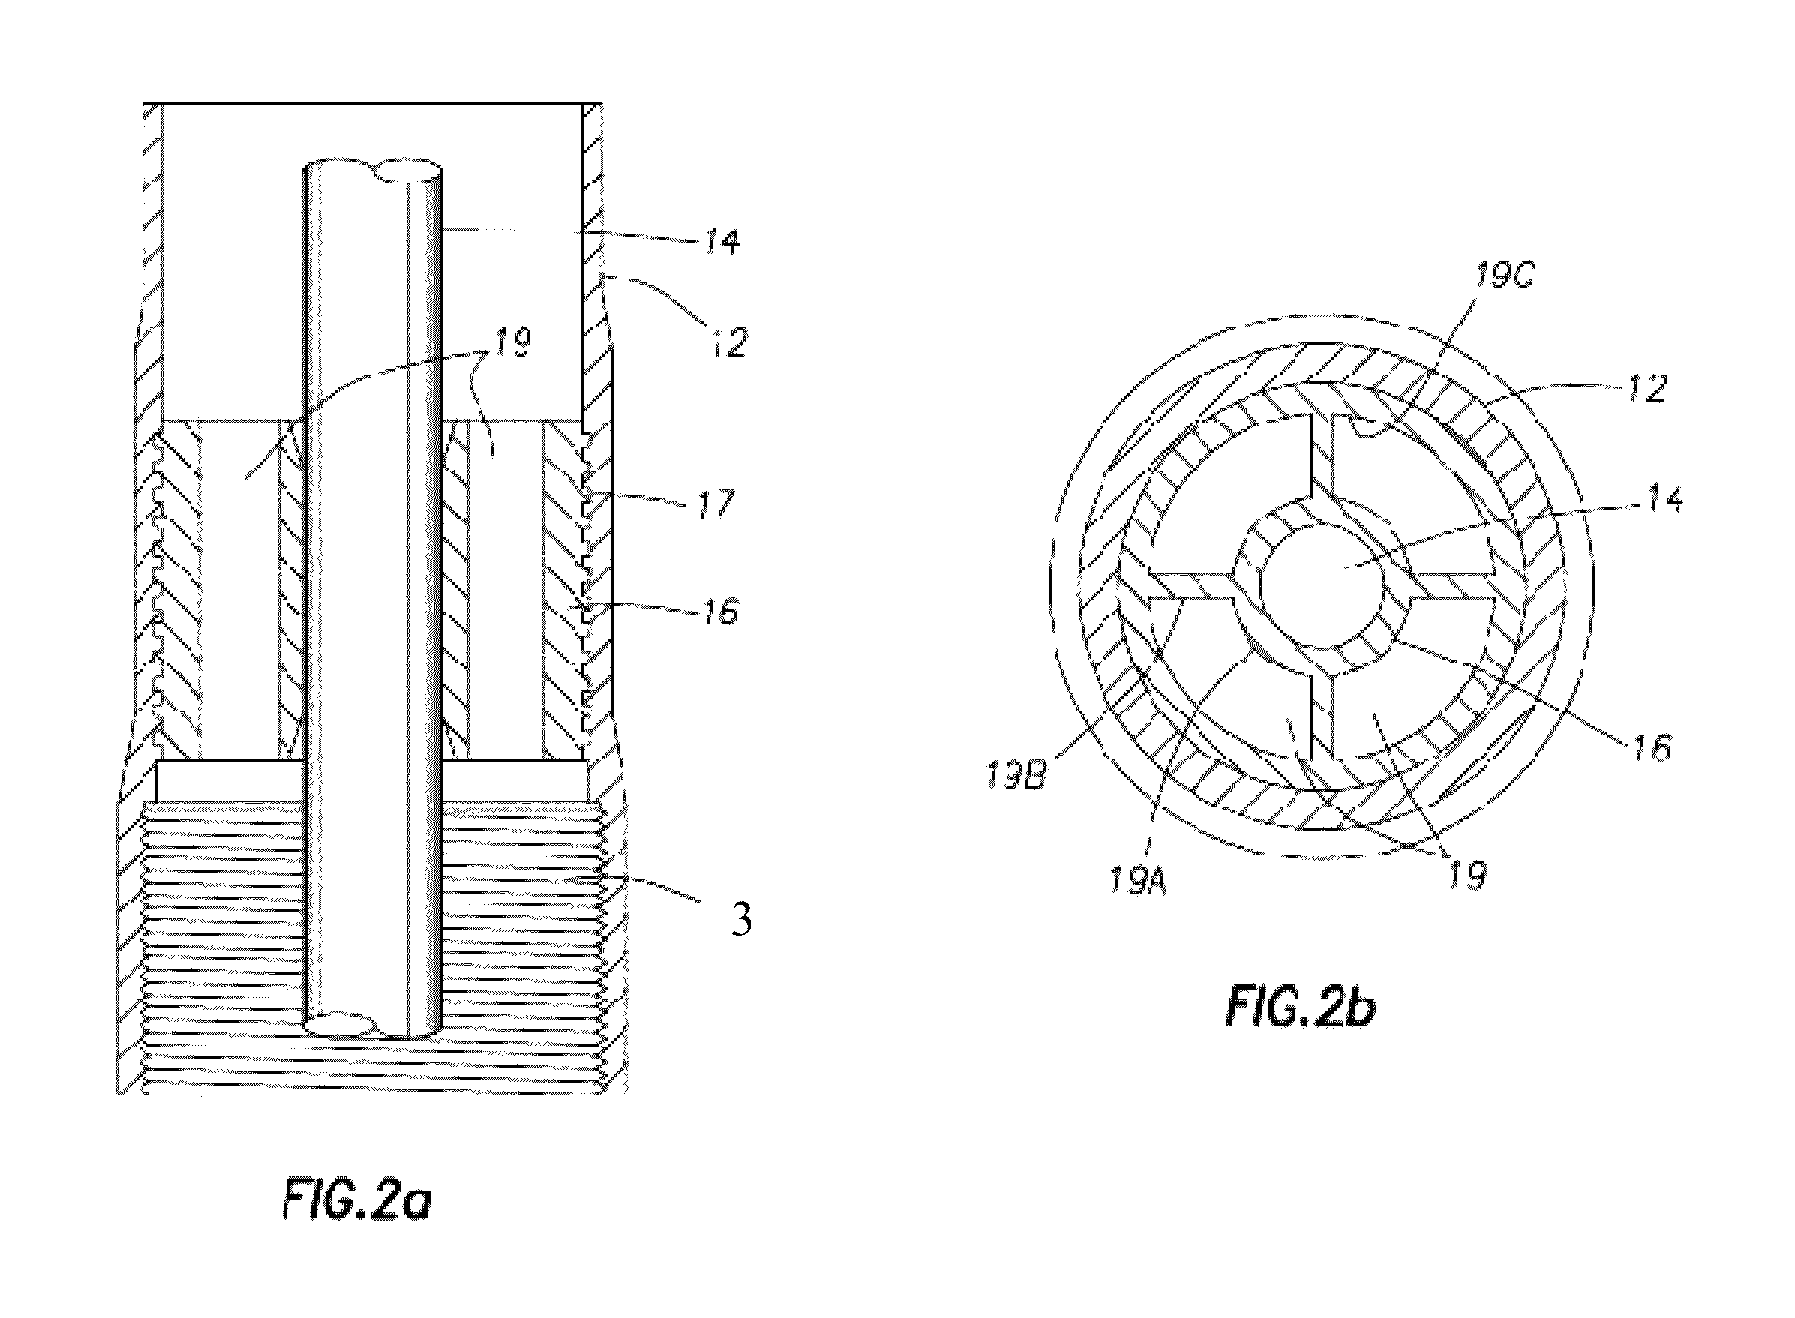 System and method for making drilling parameter and or formation evaluation measurements during casing drilling